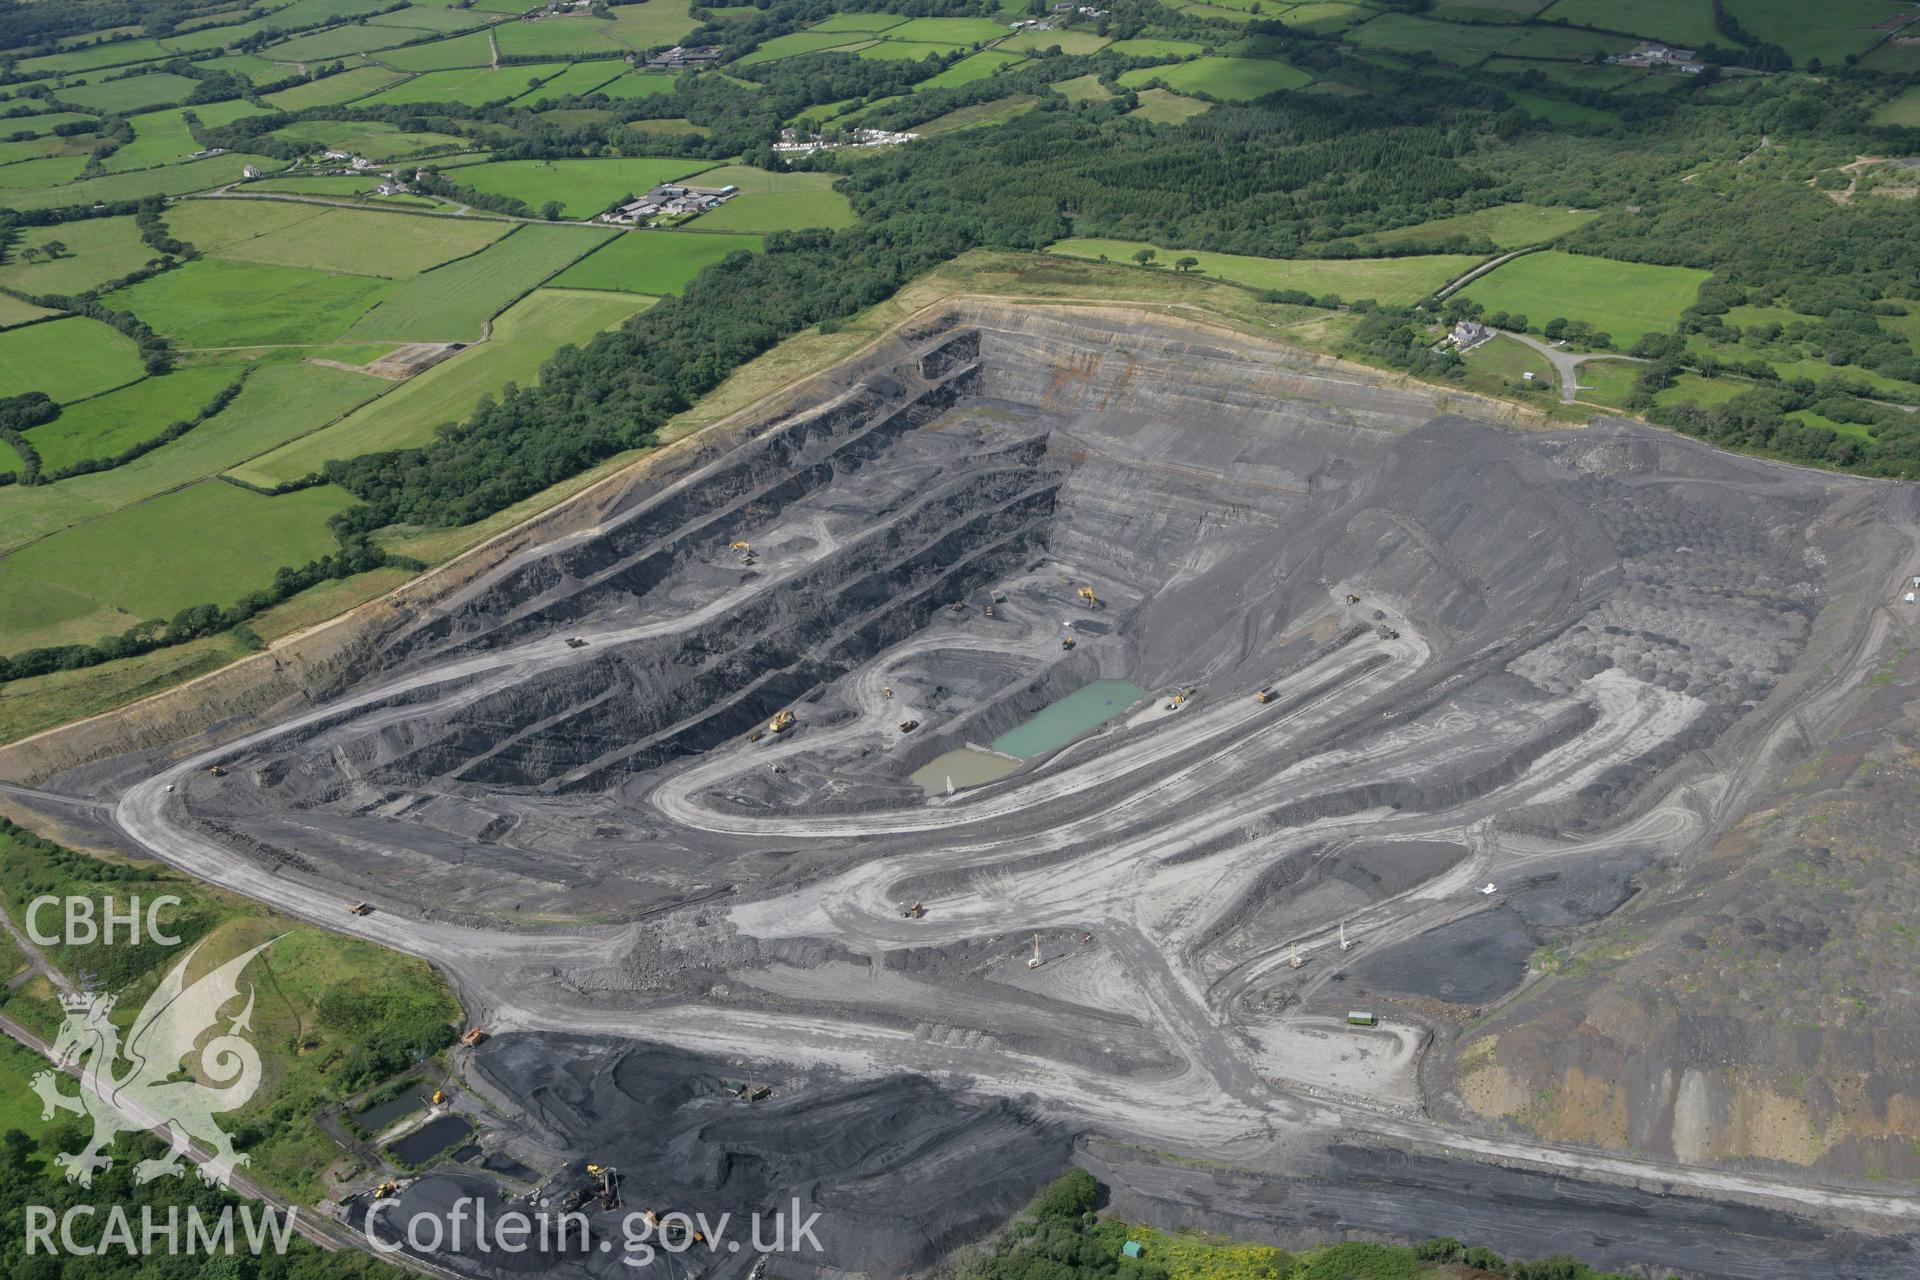 RCAHMW colour oblique aerial photograph showing Margam Open Cast Mine, Cefn Cribwr Taken on 30 July 2007 by Toby Driver